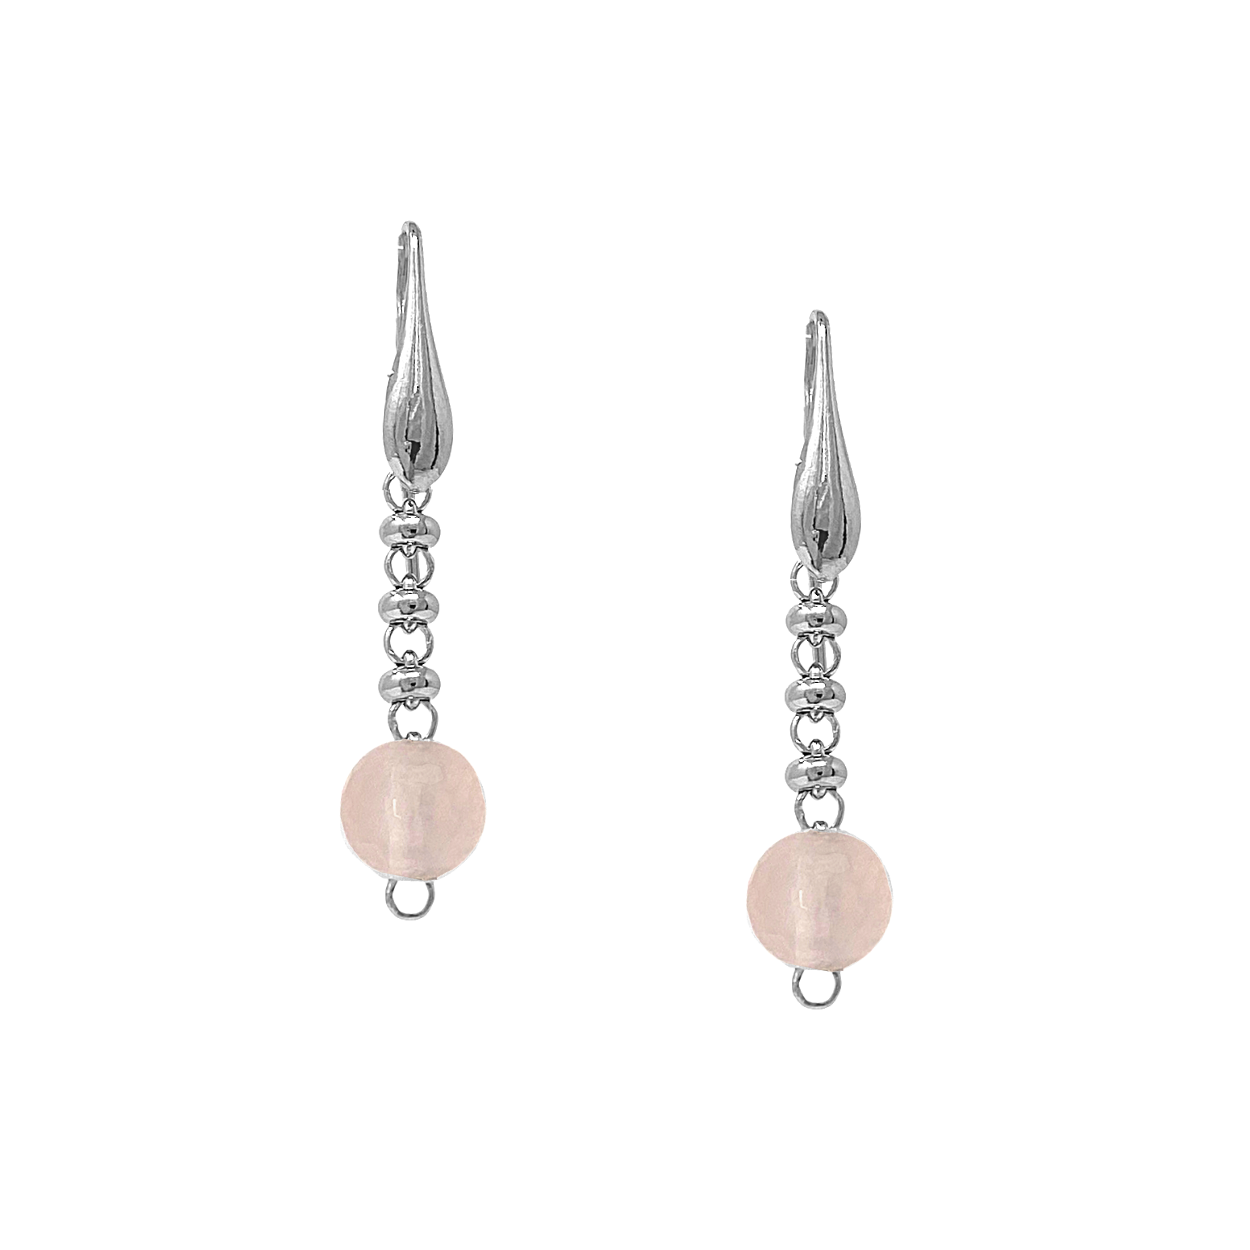 Bubbles Color Earrings in Silver with Rose Quartz